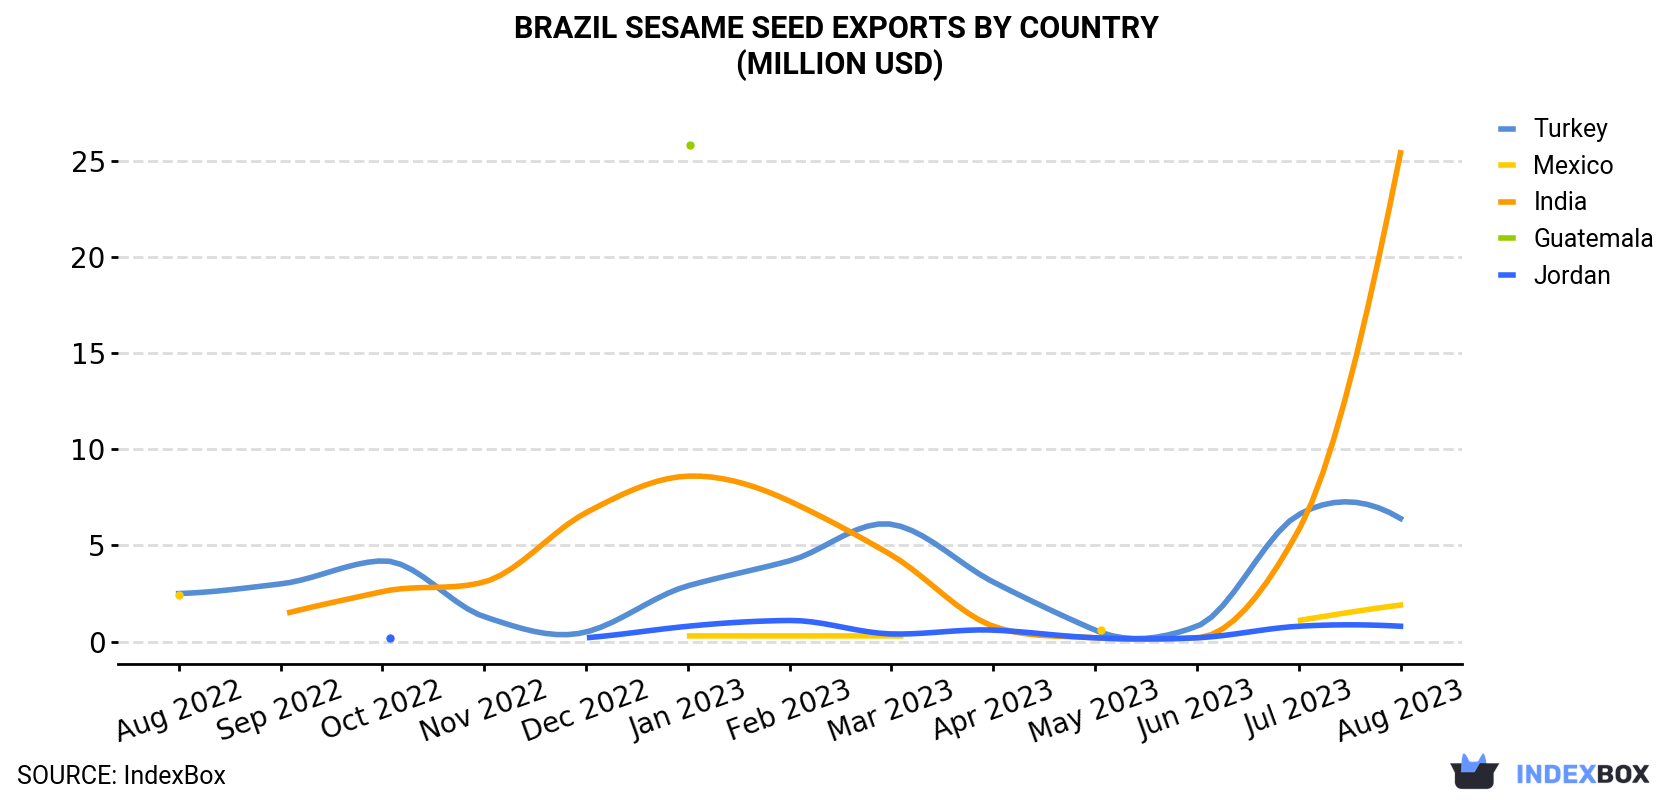 Brazil Sesame Seed Exports By Country (Million USD)